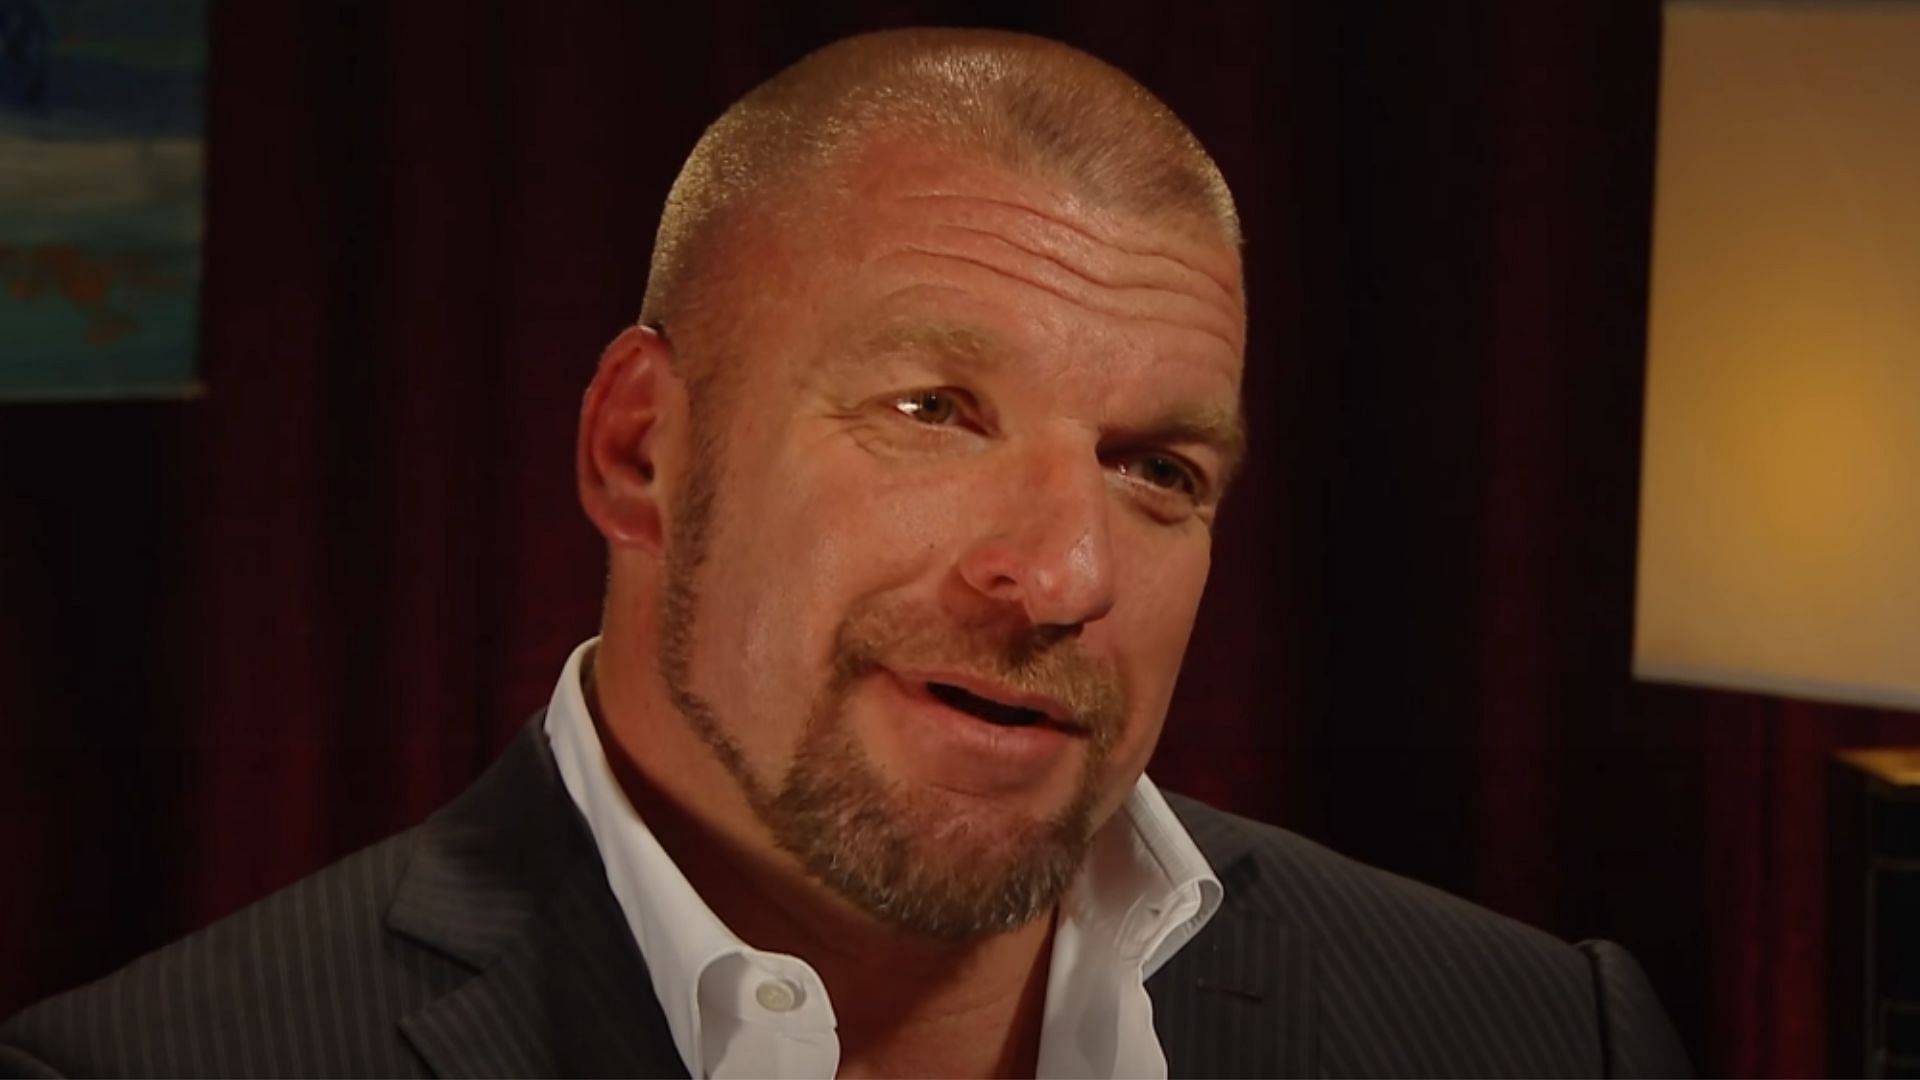 WWE head of creative Paul Levesque, also known as Triple H